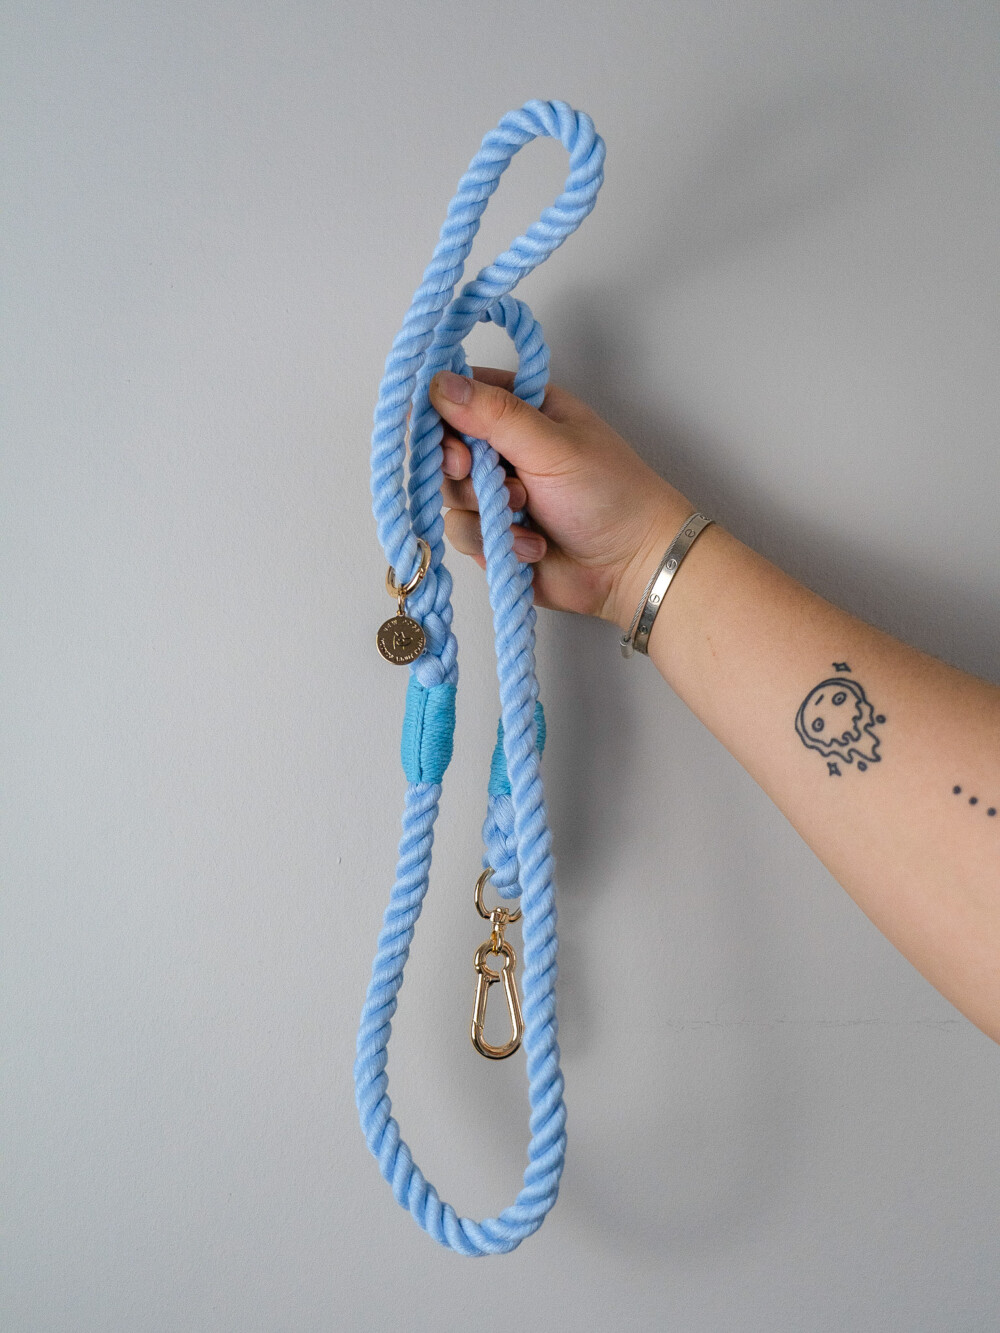 Sky Blue Rope Lead being held against a white background.